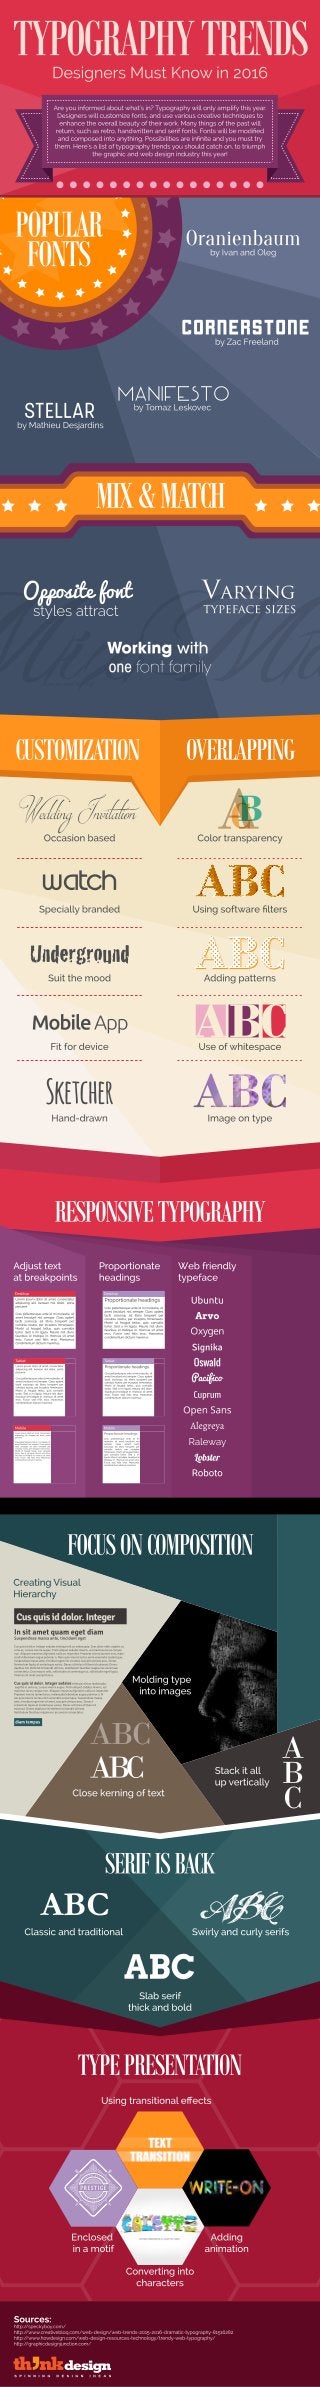 Typography Trends Designers Must Know in 2016